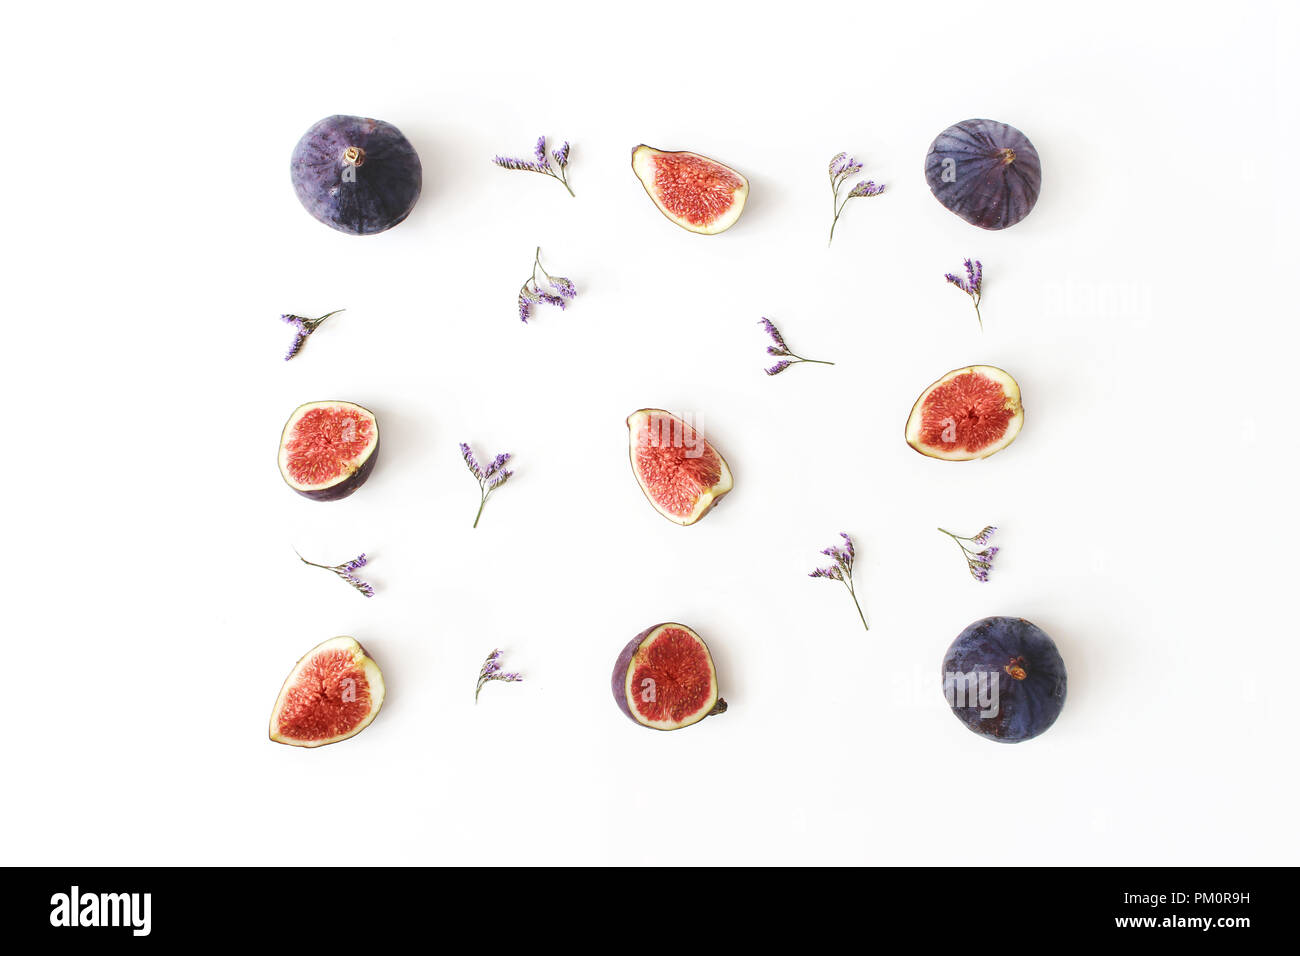 Fresh ripe purple figs. Food Photo. Creative composition of the whole and sliced exotic fruit and violet limonium flowers on a white table background. Floral pattern. Flat lay, view from above. Stock Photo